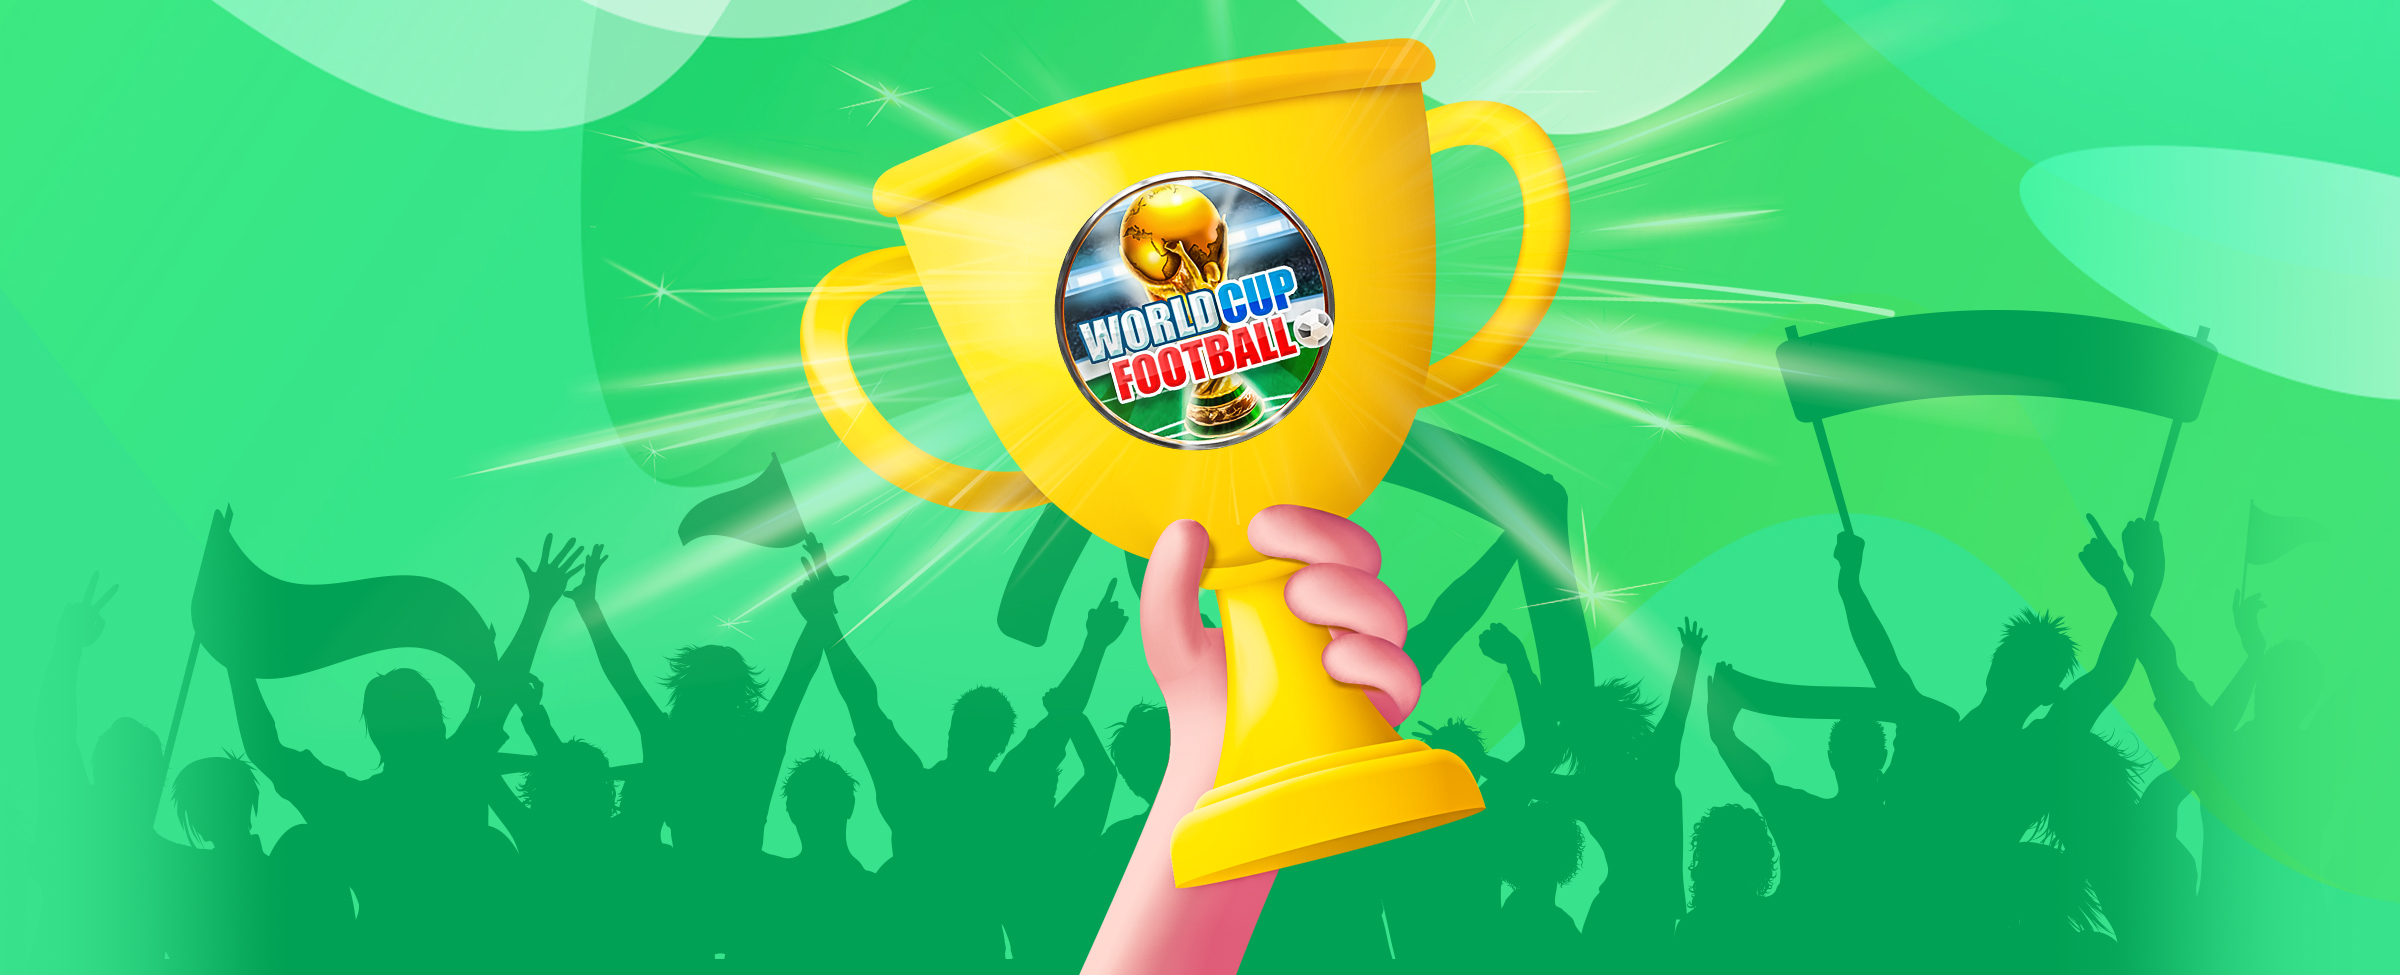 An illustrated hand holds up a gold trophy with a logo of the SlotsLV slot game called World Cup Football, set against a green background with faded silhouettes of football fans waving flags.